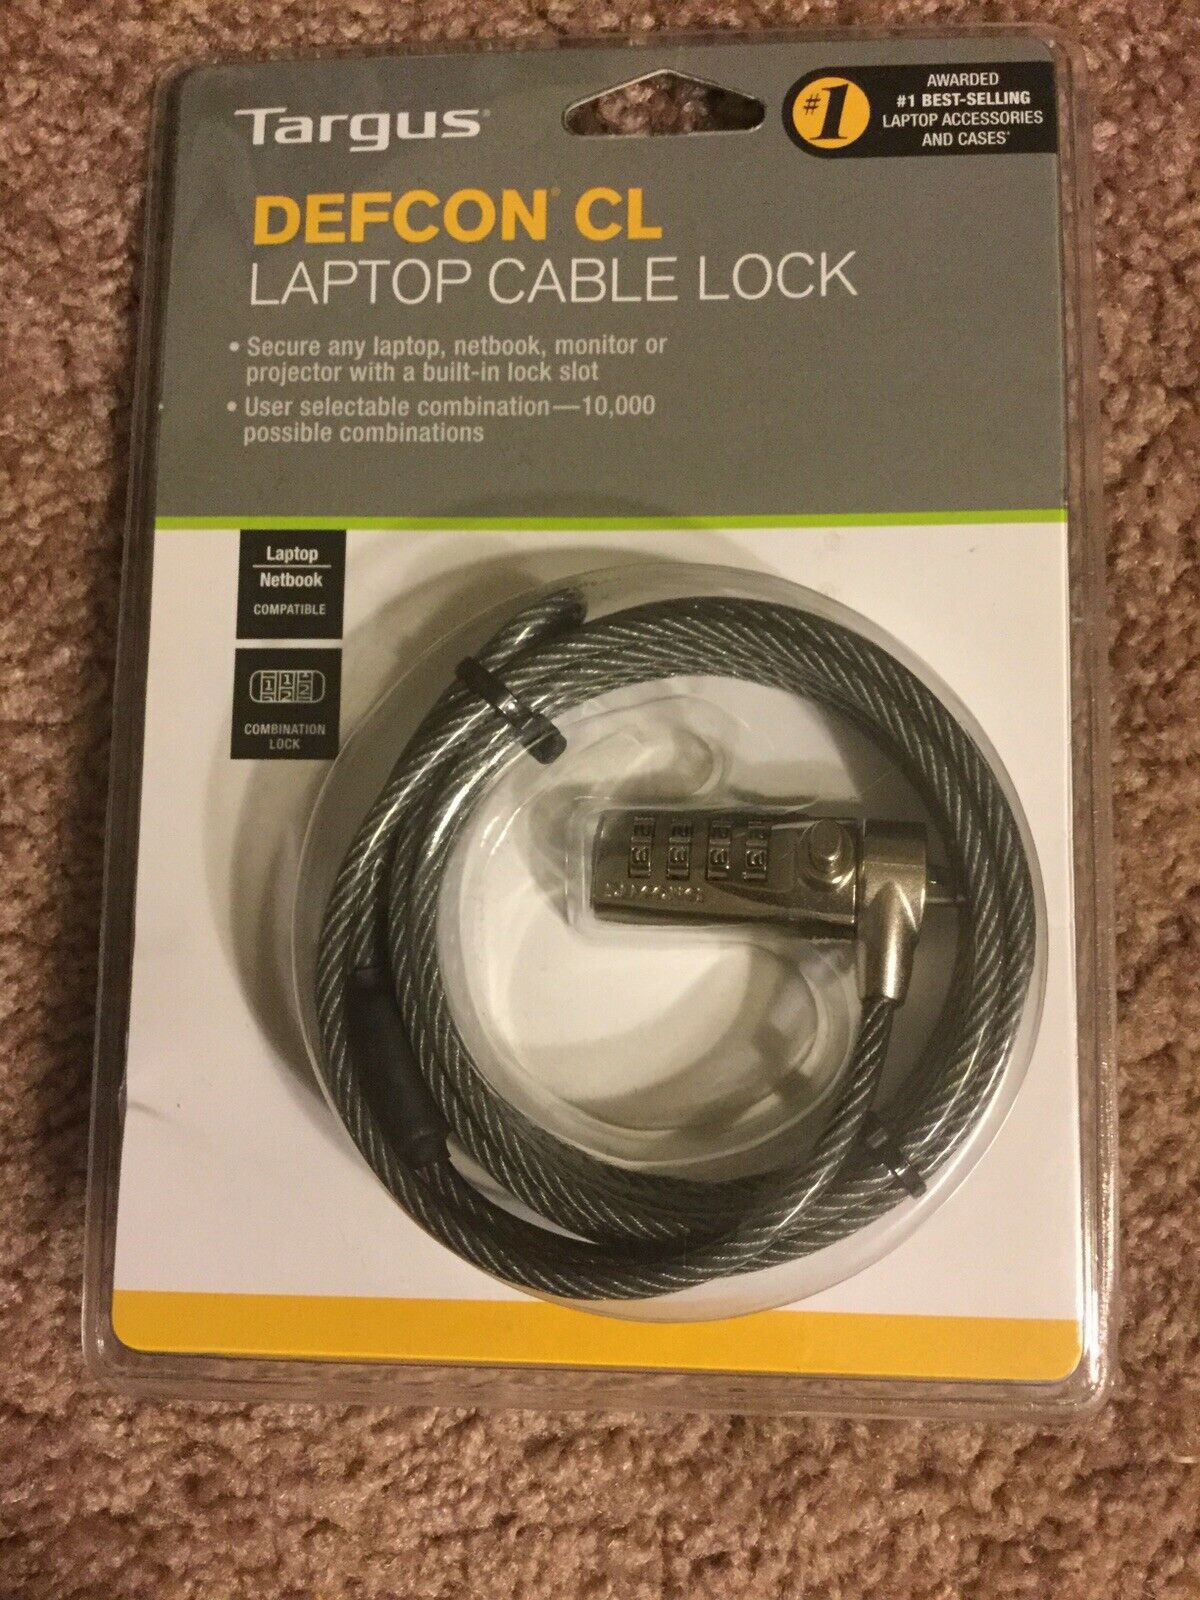 Targus Defcon Cl Laptop Cable Lock - Brand New